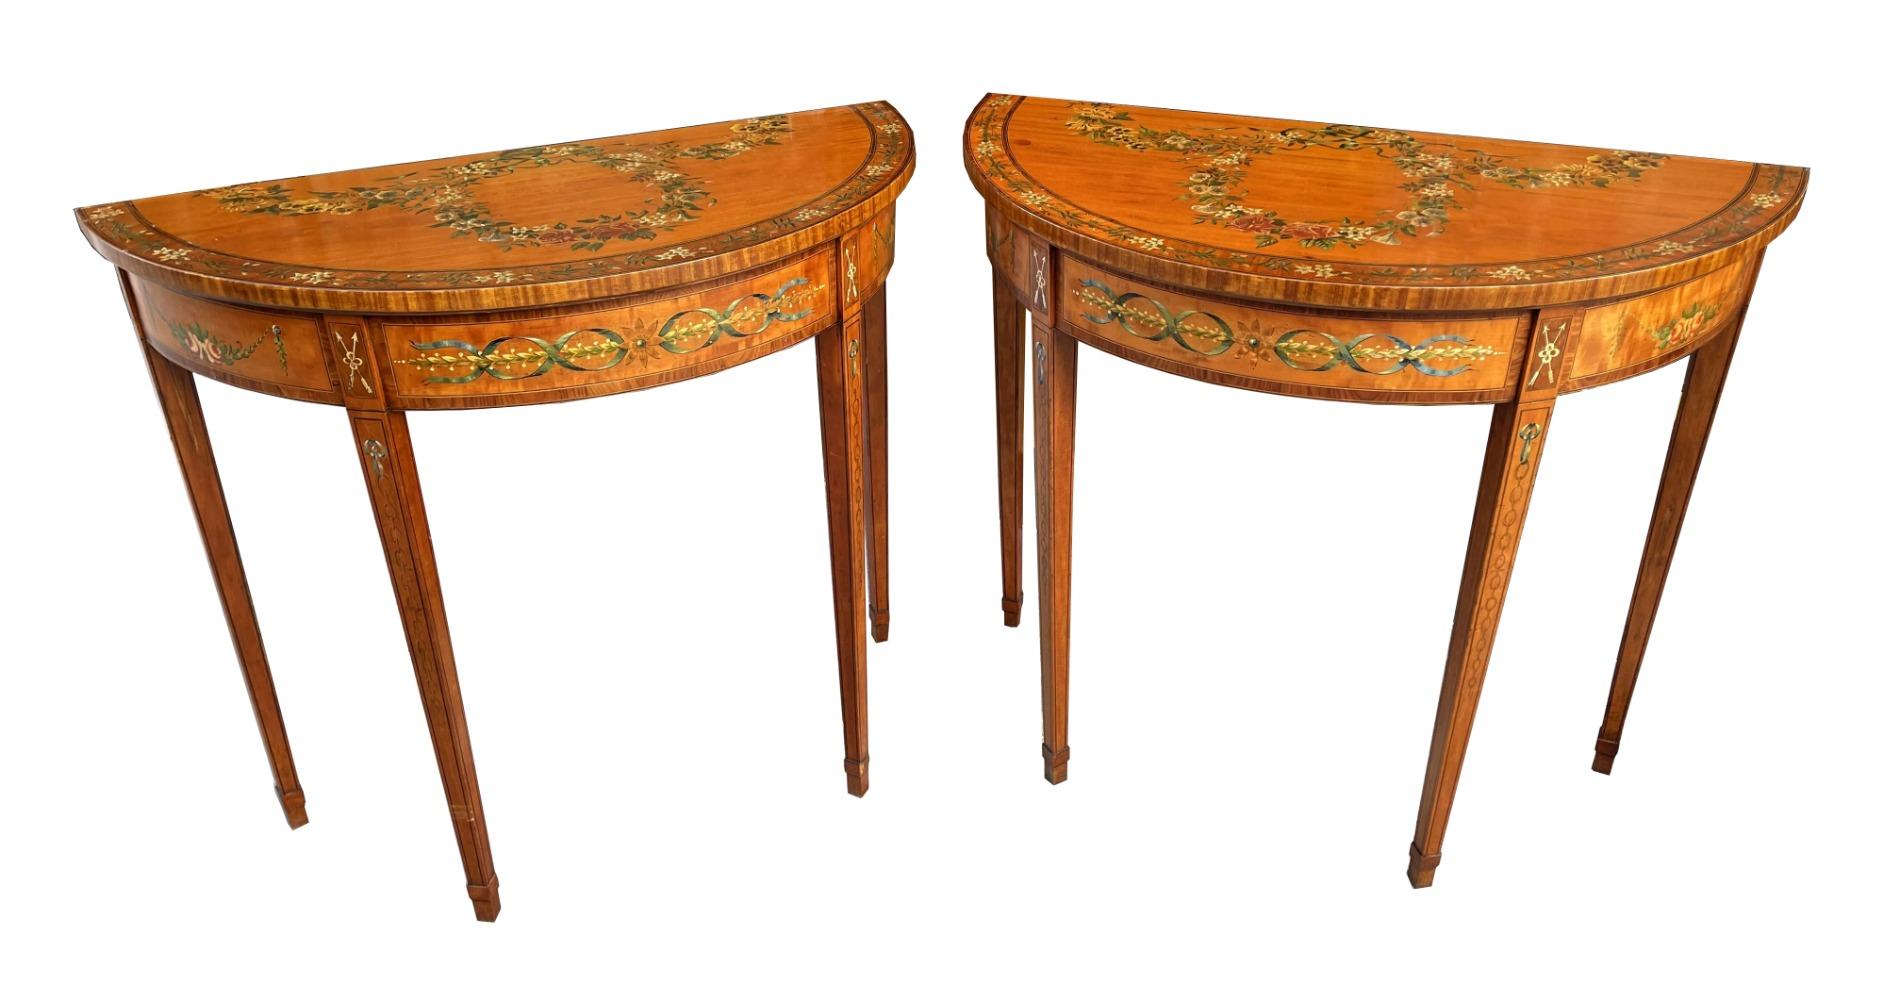 An exceptionally fine example of a Pair of Hand Decorated in colours Inlaid Demi-lune well figured Satinwood Side Tables of compact proportions of English origin, made during the last quarter of the Nineteenth Century. 

Superbly painted with